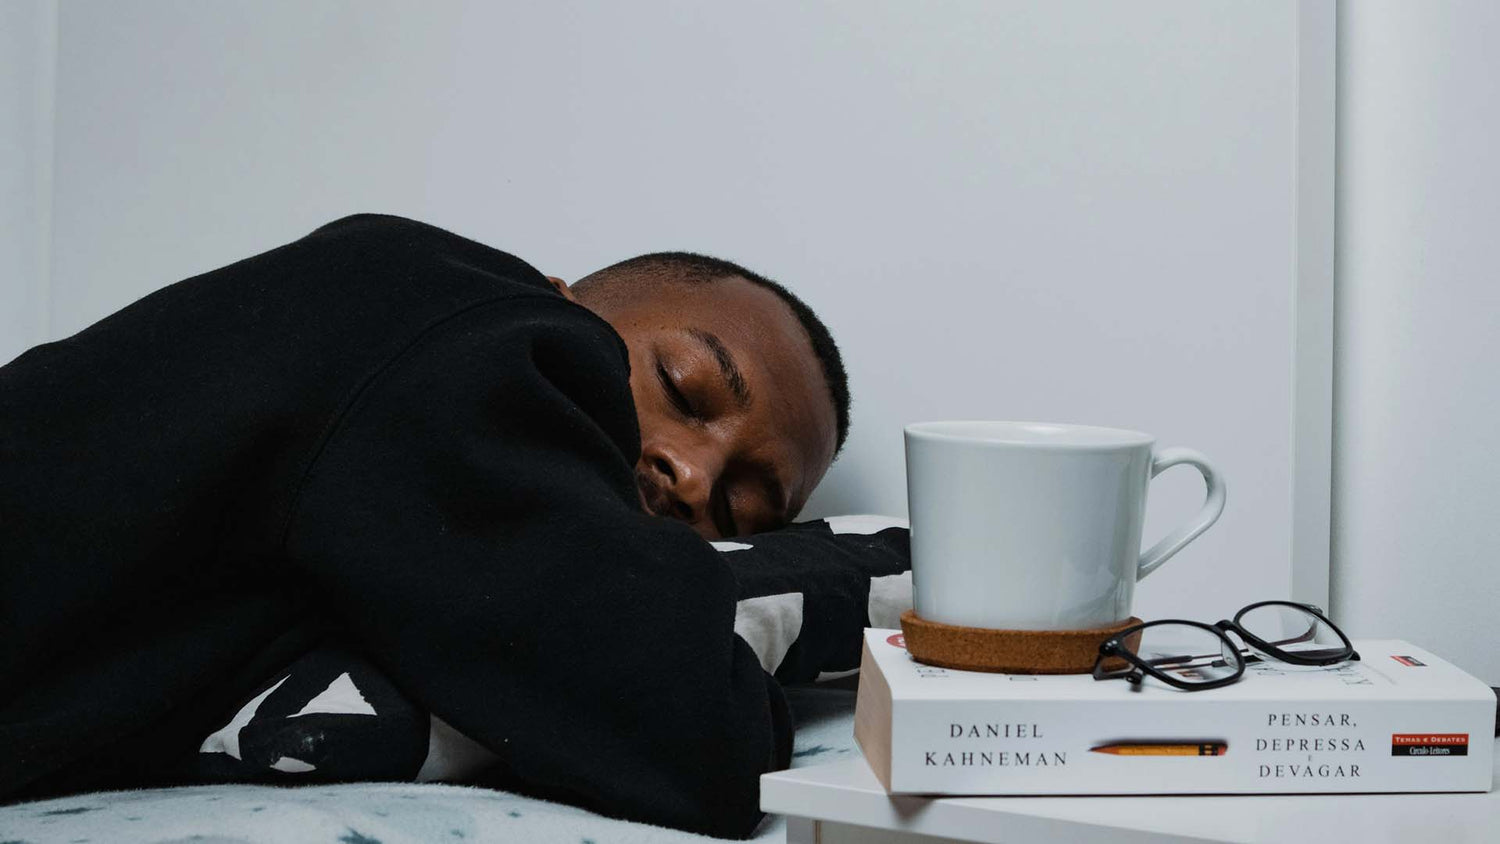 a man sleeping on a bed next to a bedside table with a book and a mug